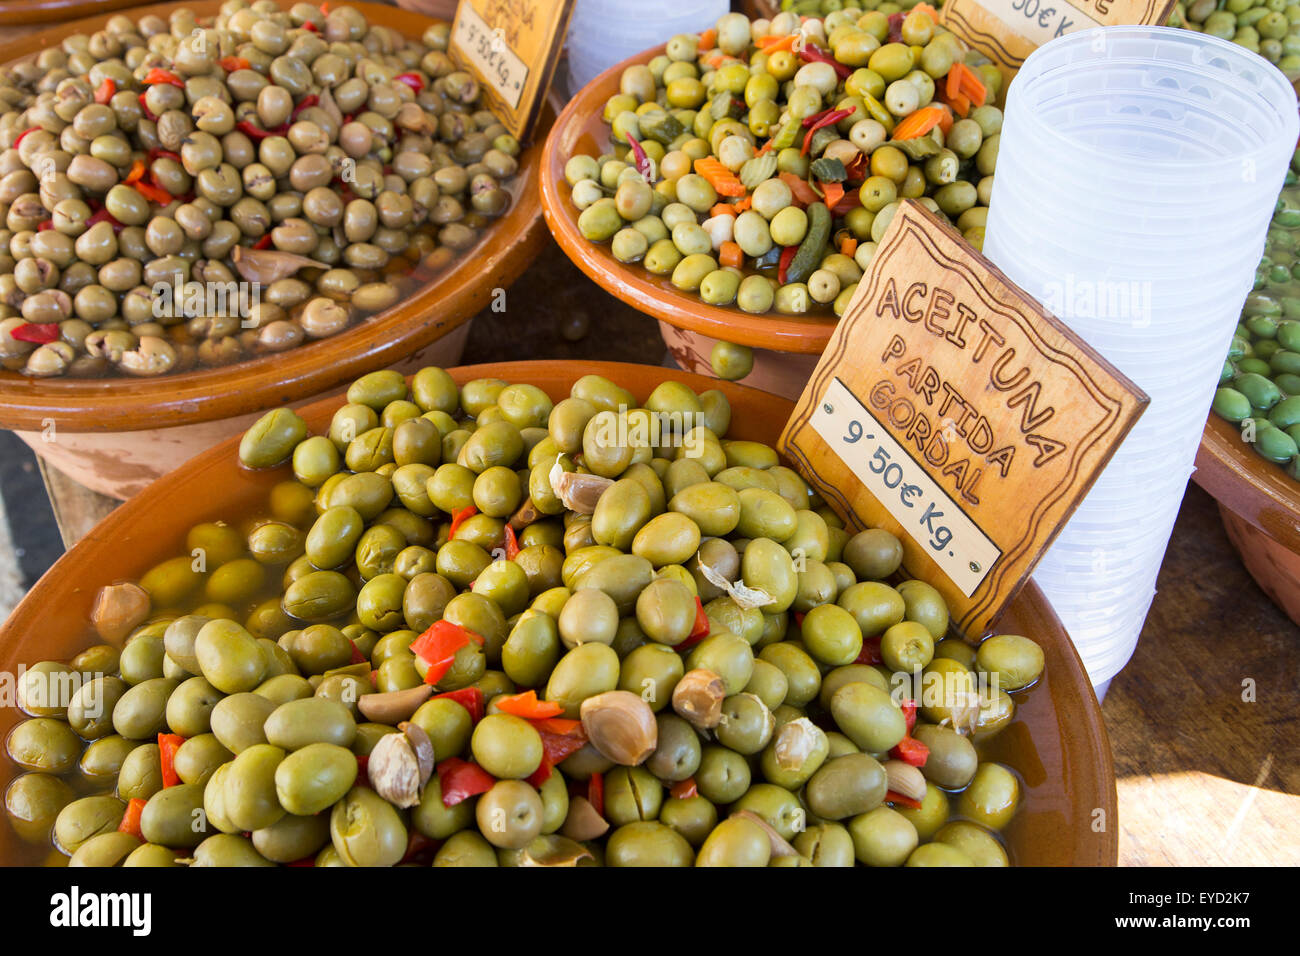 Olives on sale at Pollensa old town market on the island of Majorca, Spain Stock Photo